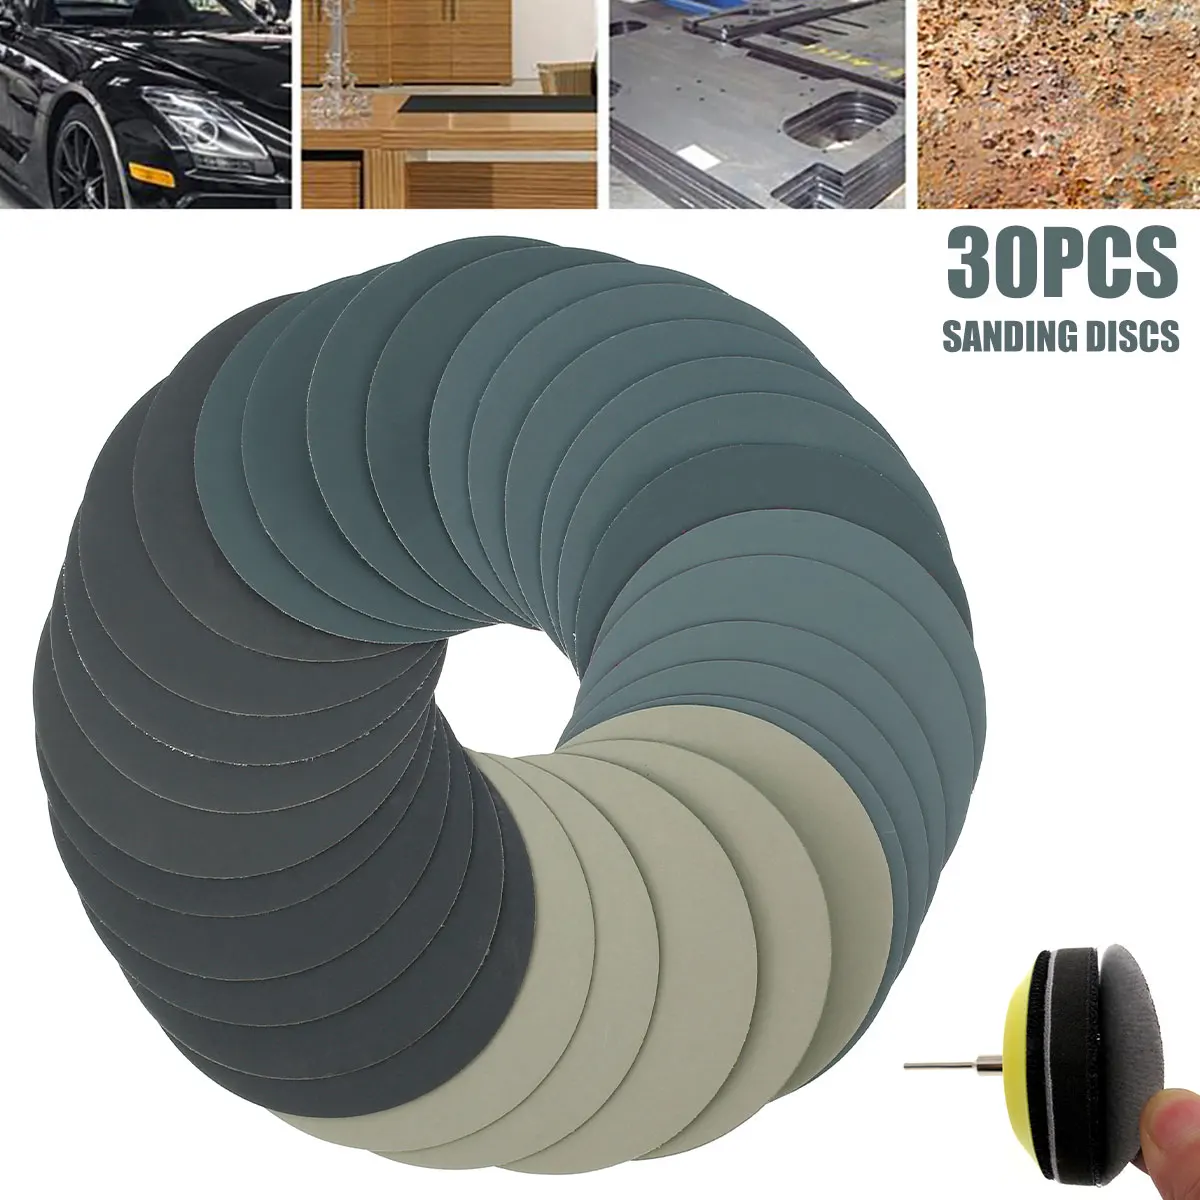 

30pcs 5 Inch Sanding Discs Conditioning Disc Sanding Disc for Die Grinder Surface Strip Polish Burr Finish Rust Paint Removal